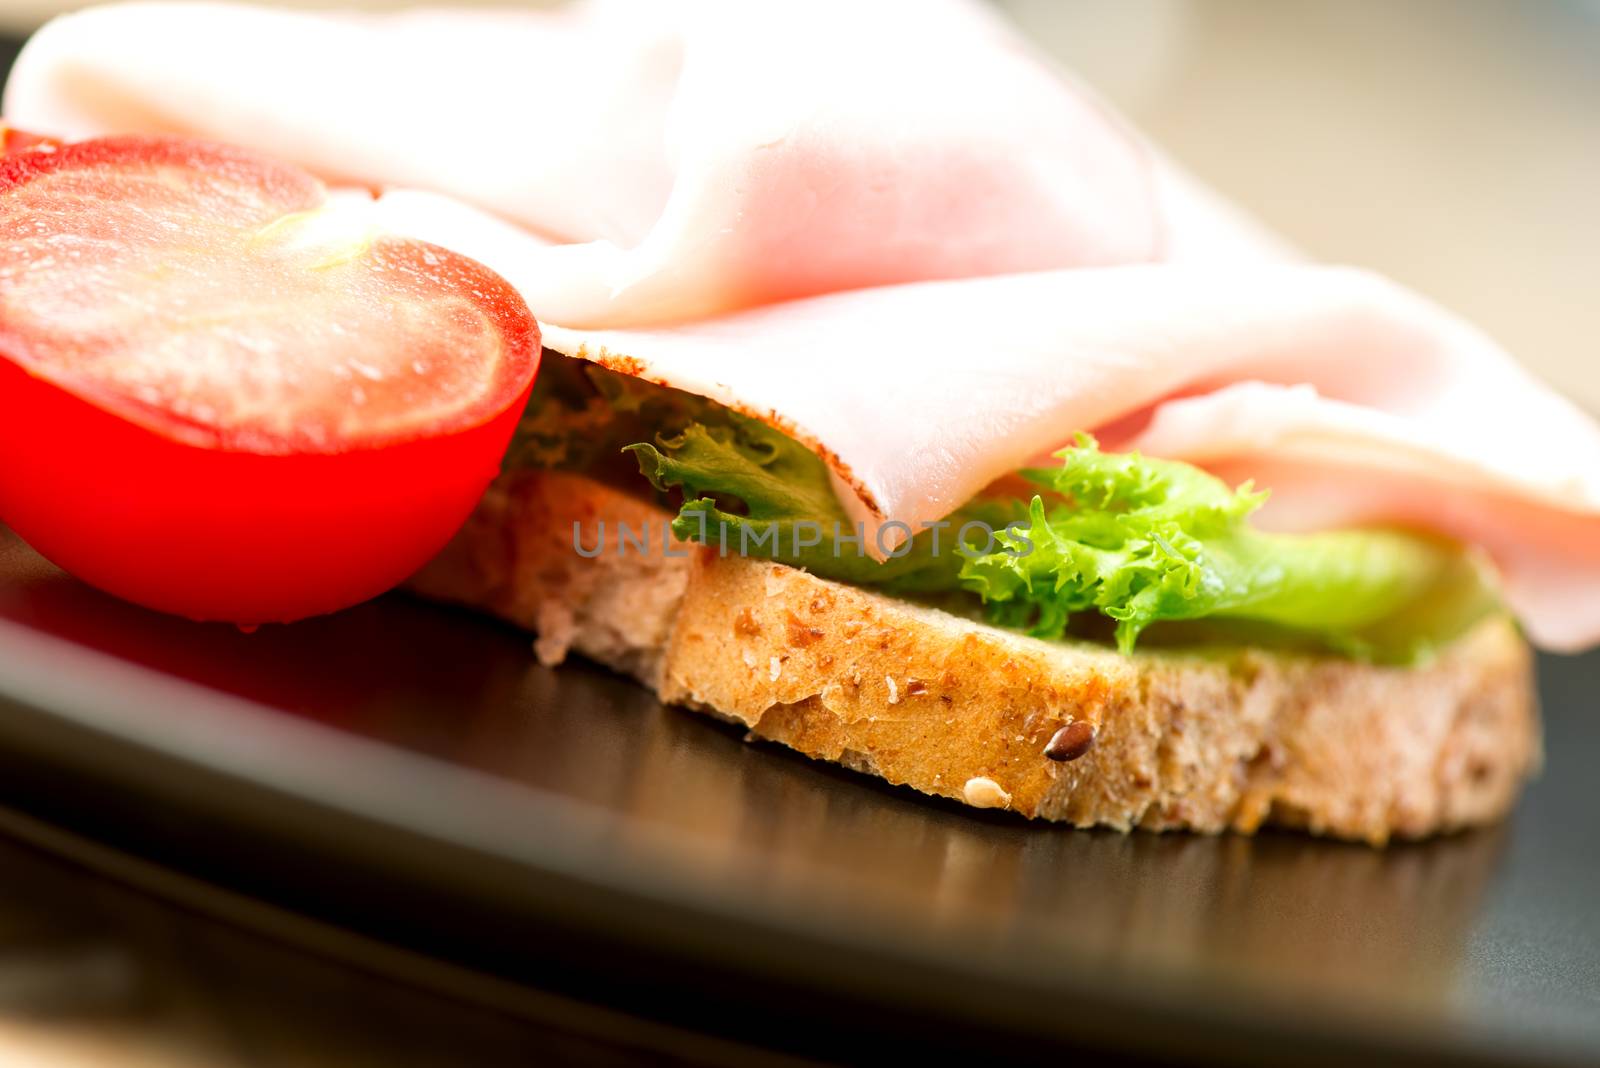 Open-faced  sandwich with ham, tomato and salad leaves